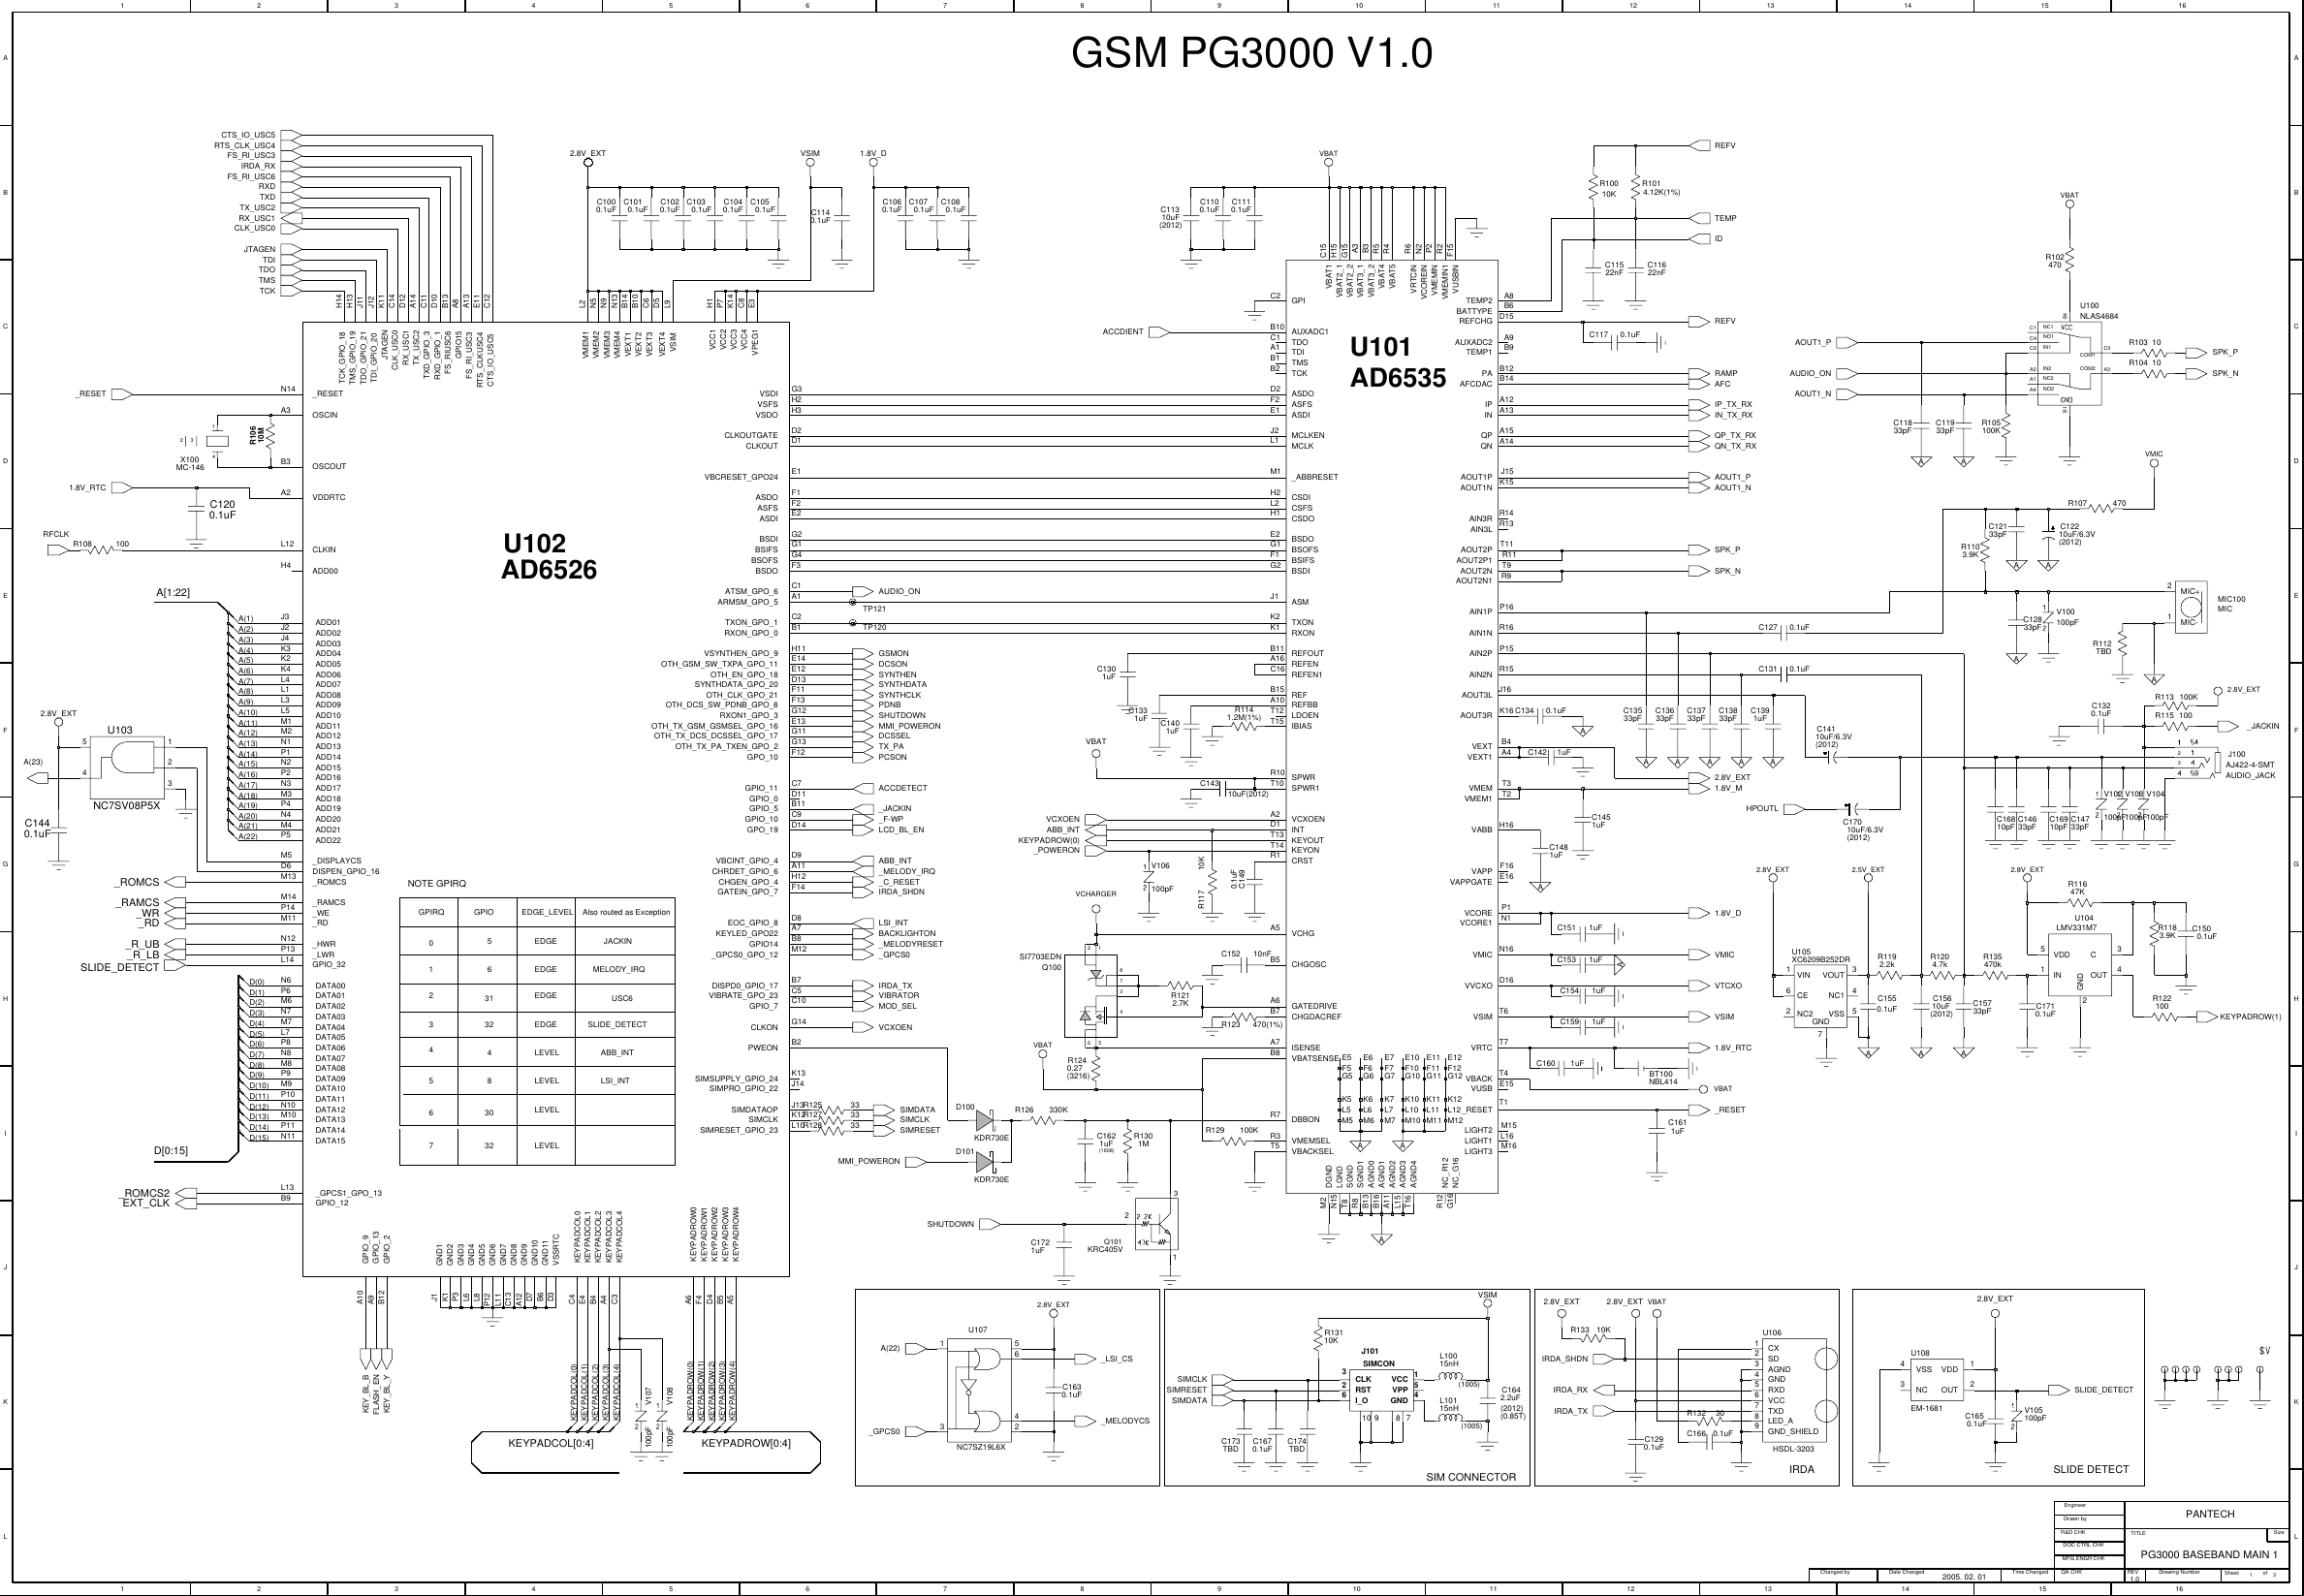 Page 1 of 8 - Pantech-pg3000-schematics